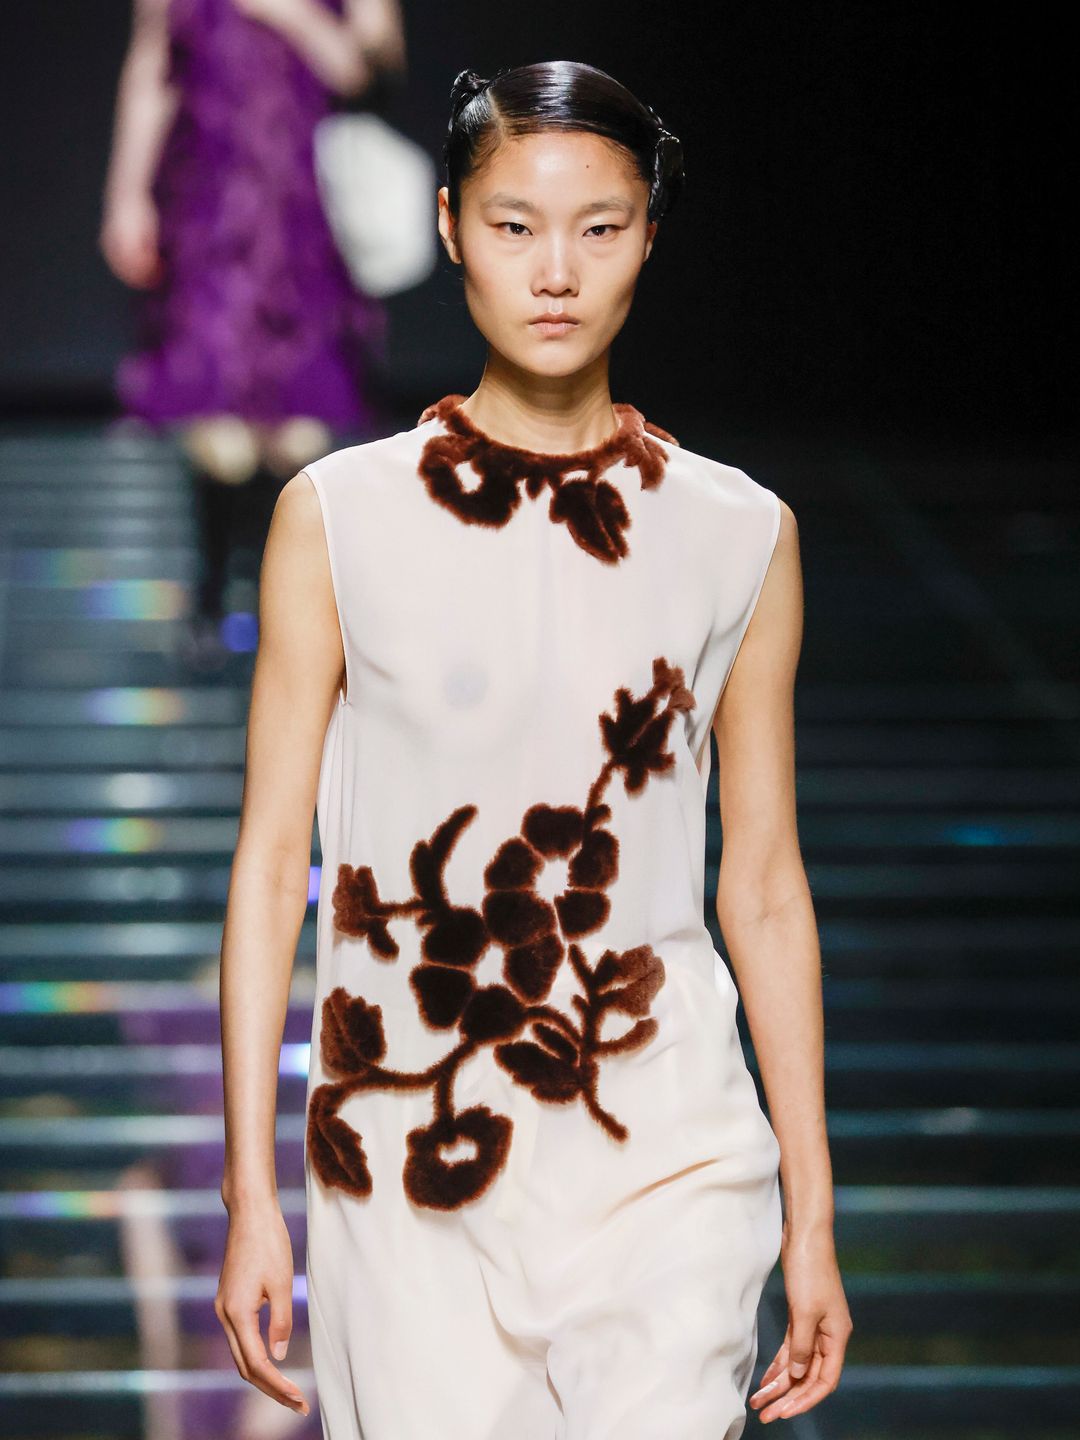 A model walks the runway during the Prada Ready to Wear show wearing a white dress with brown floral accents.